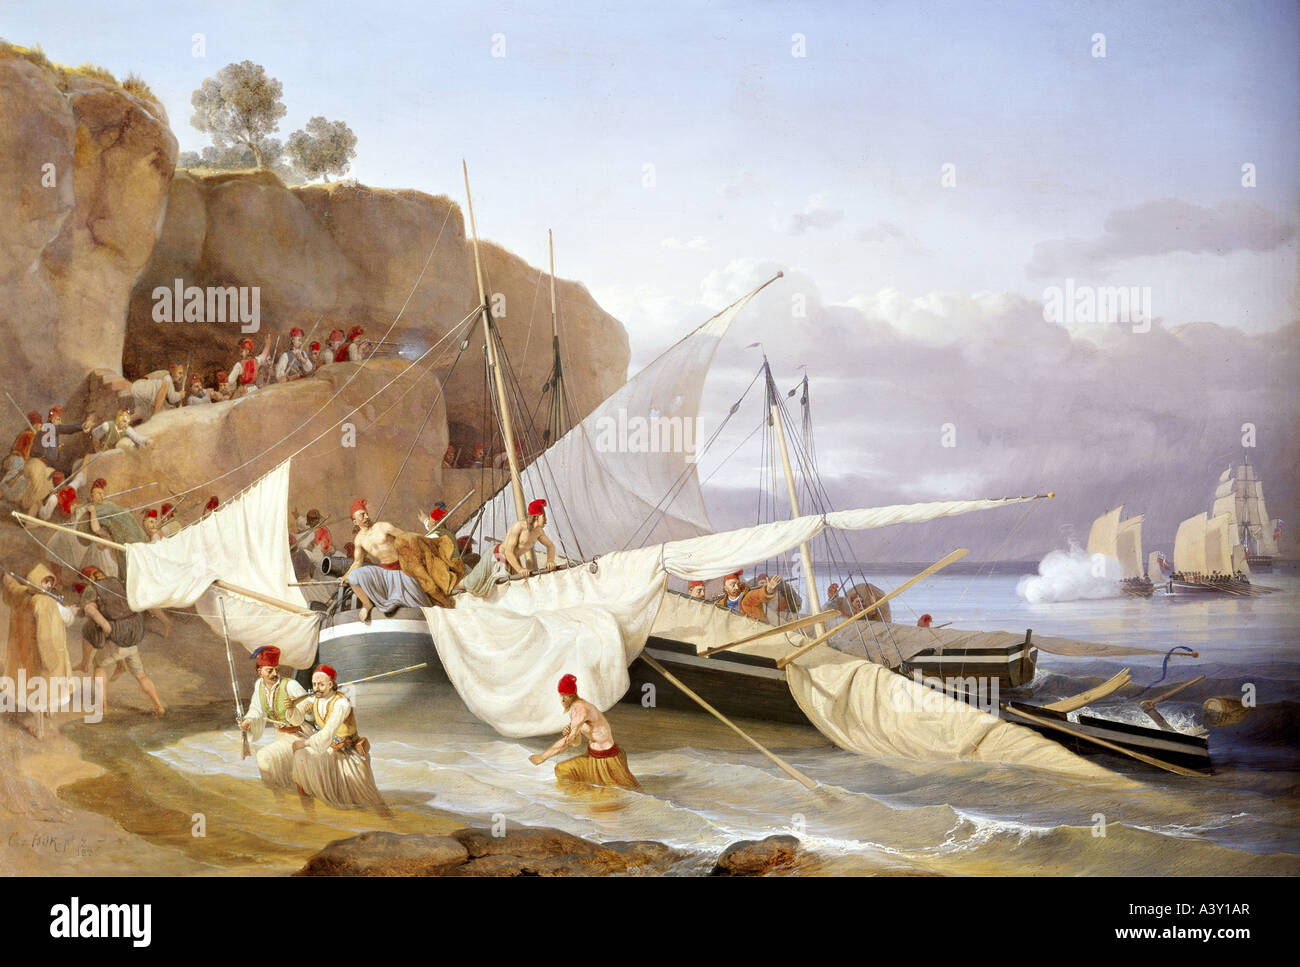 event, Greek war of independence 1821 - 1829, Greek pirates defending bay against Britons, painting by Carl von Heydeck, 1836, 60 cm x 92 cm, municipal museum, Munich, historic, historical, Greece, Greeks, Great Britain, Ottoman Empire, Royal Navy, battleship, ship. coast, battle, landing, wounded, rock, sea, Mediterranean, traditional costume, Europe, geography, fine arts, romanticism, 19th century, pirate, people, Stock Photo